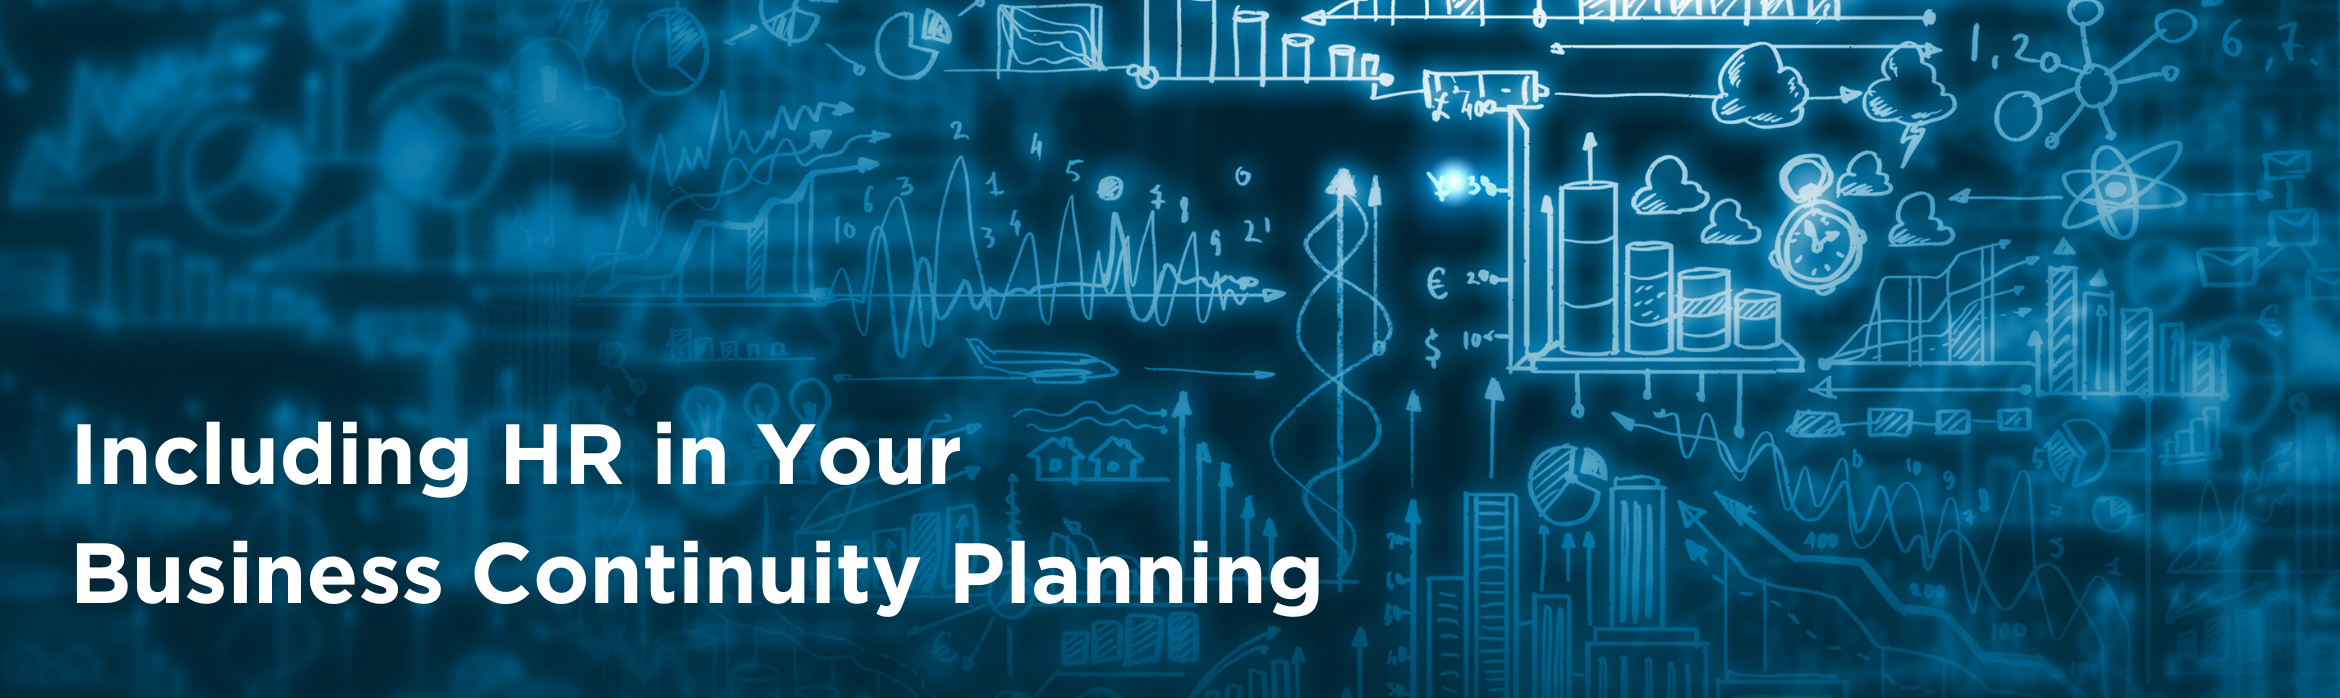 hr business continuity plan nhs